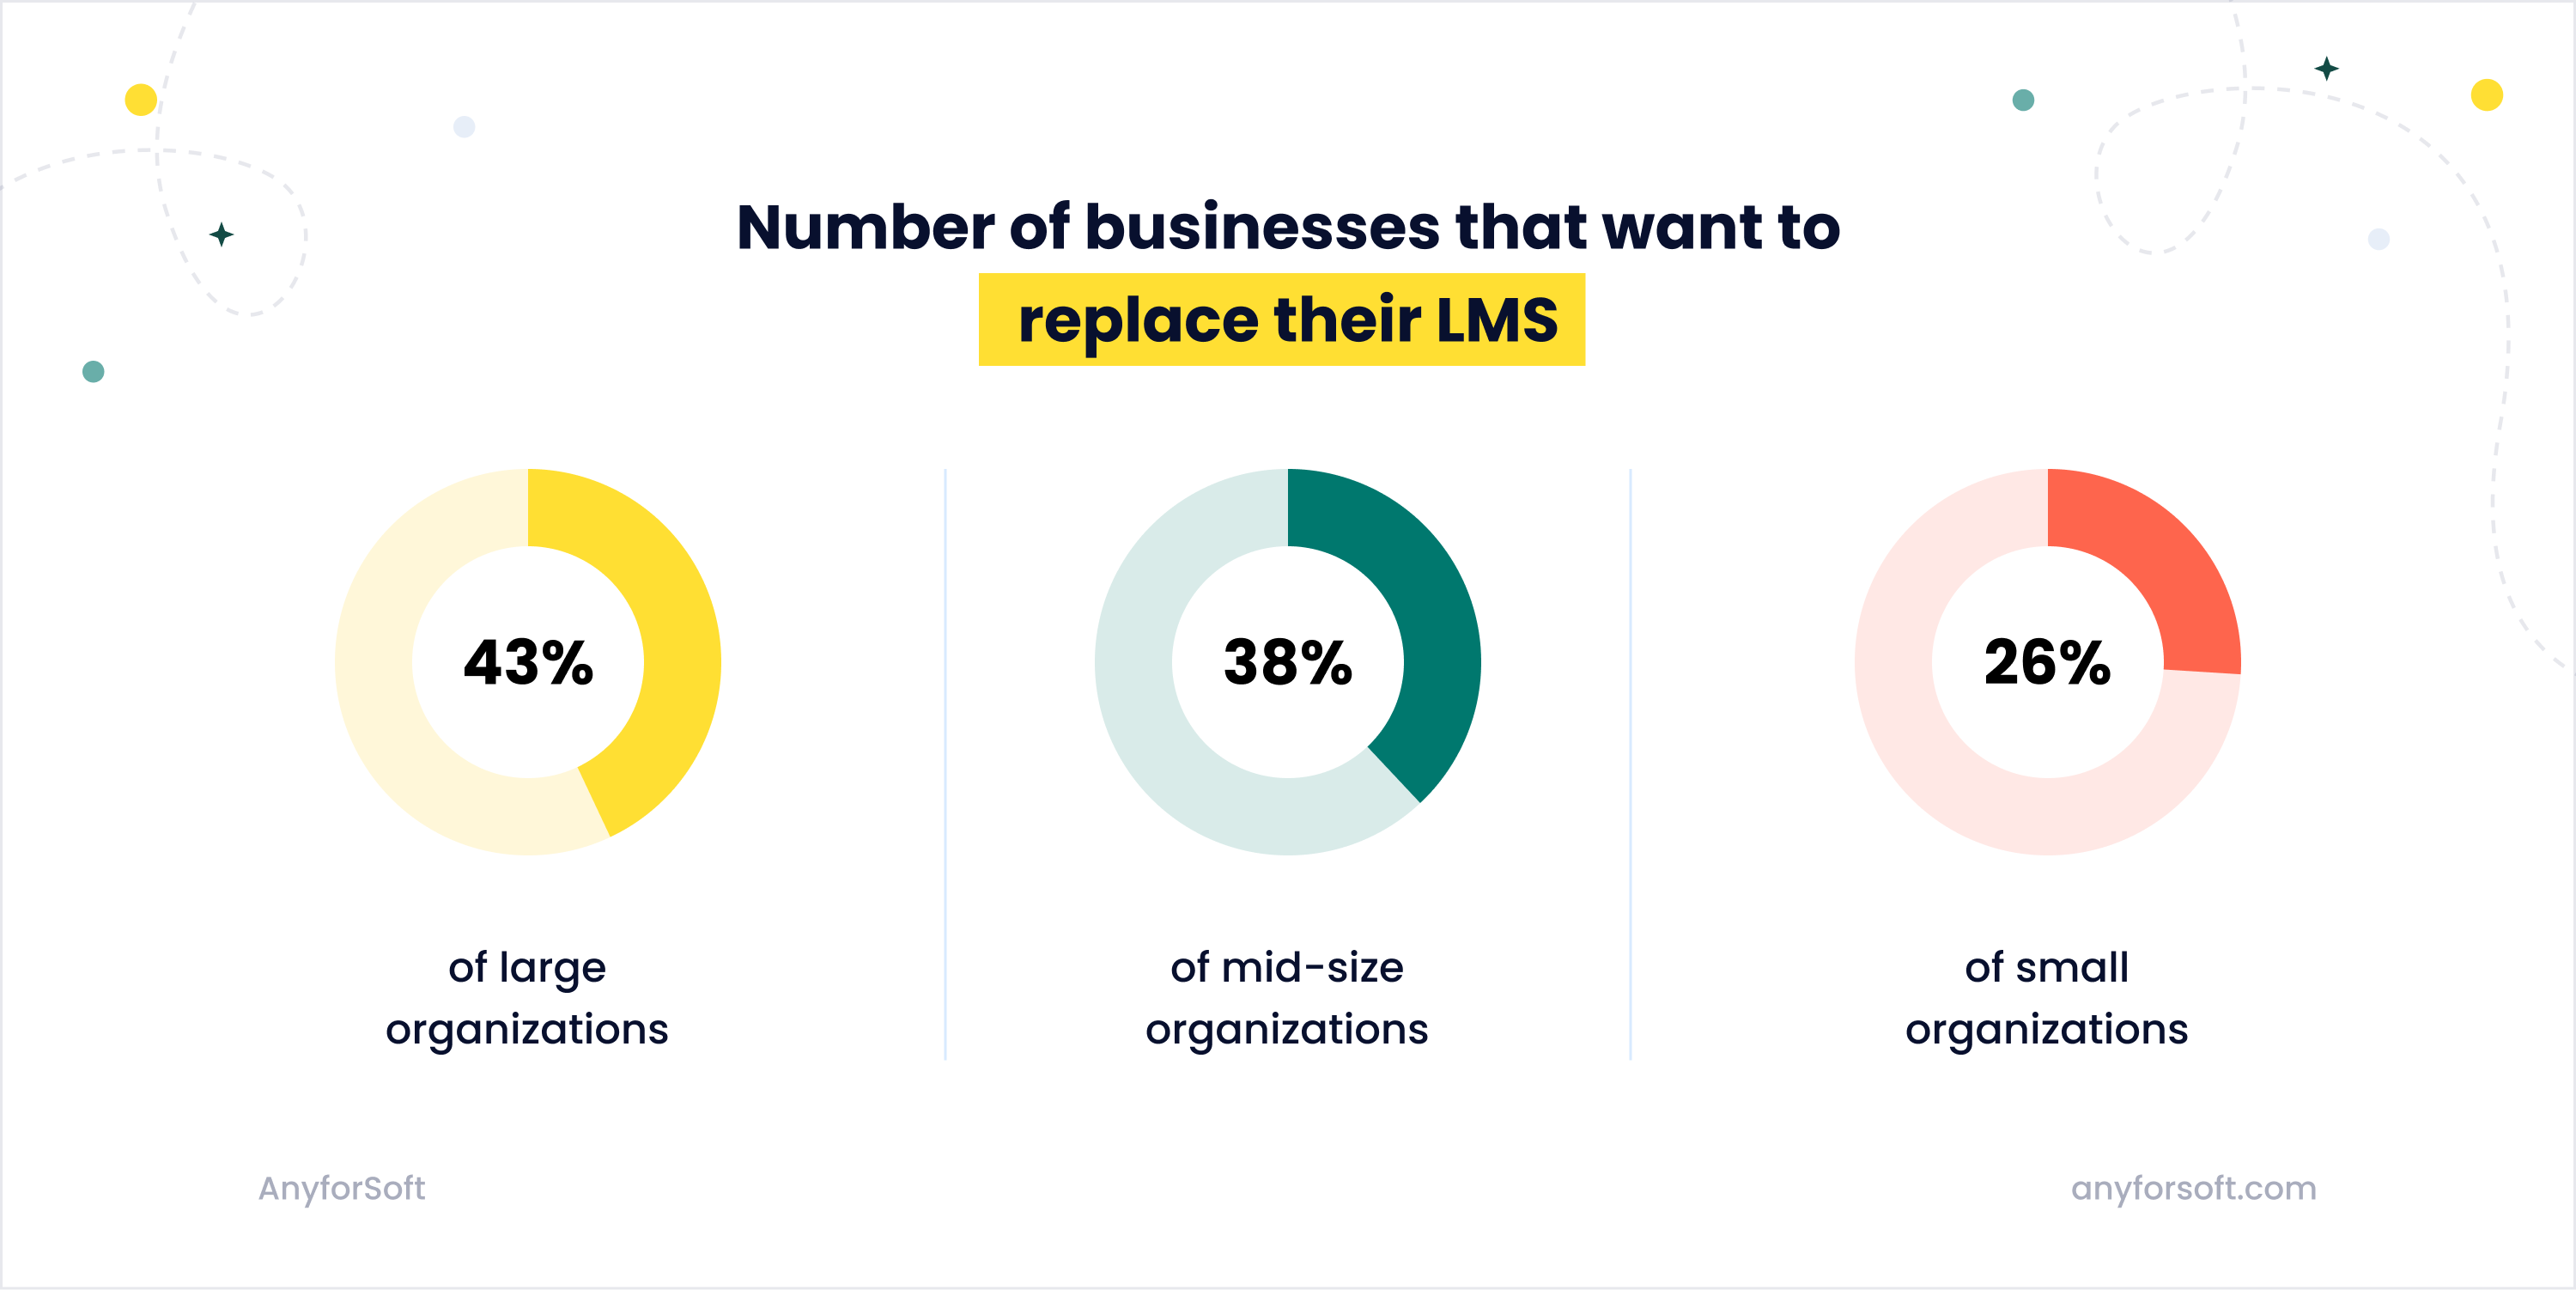 Number of businesses that want to replace their LMS